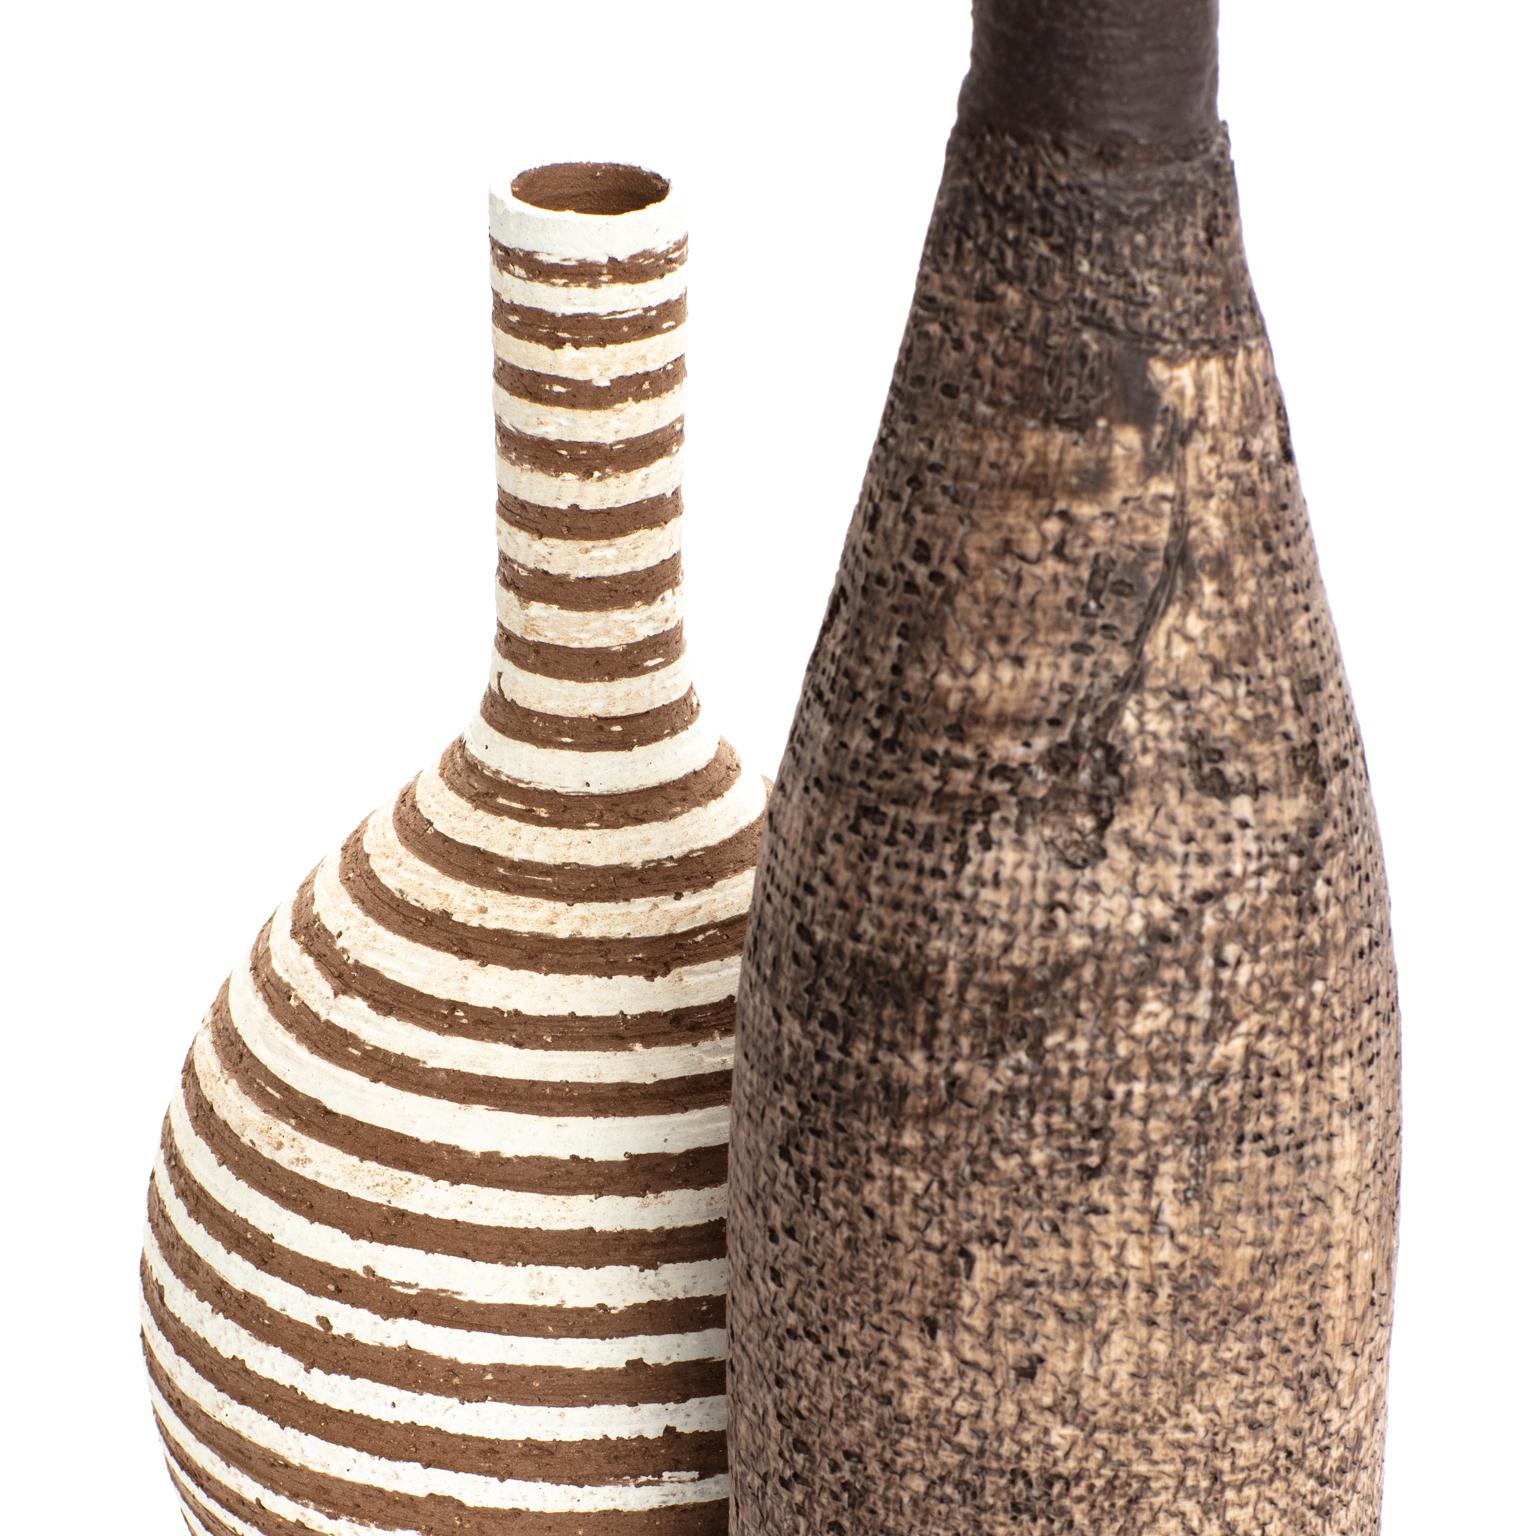 Measures: 

23 x 6 x 31 cm
34 x 4 x 23 cm

Egidio Milesi (Milano, 1955), after studying art at school approached the pottery and the ceramics in the late 1970s. Since 1980, in his studio in Milan, Egidio explored the clay world in every aspect.